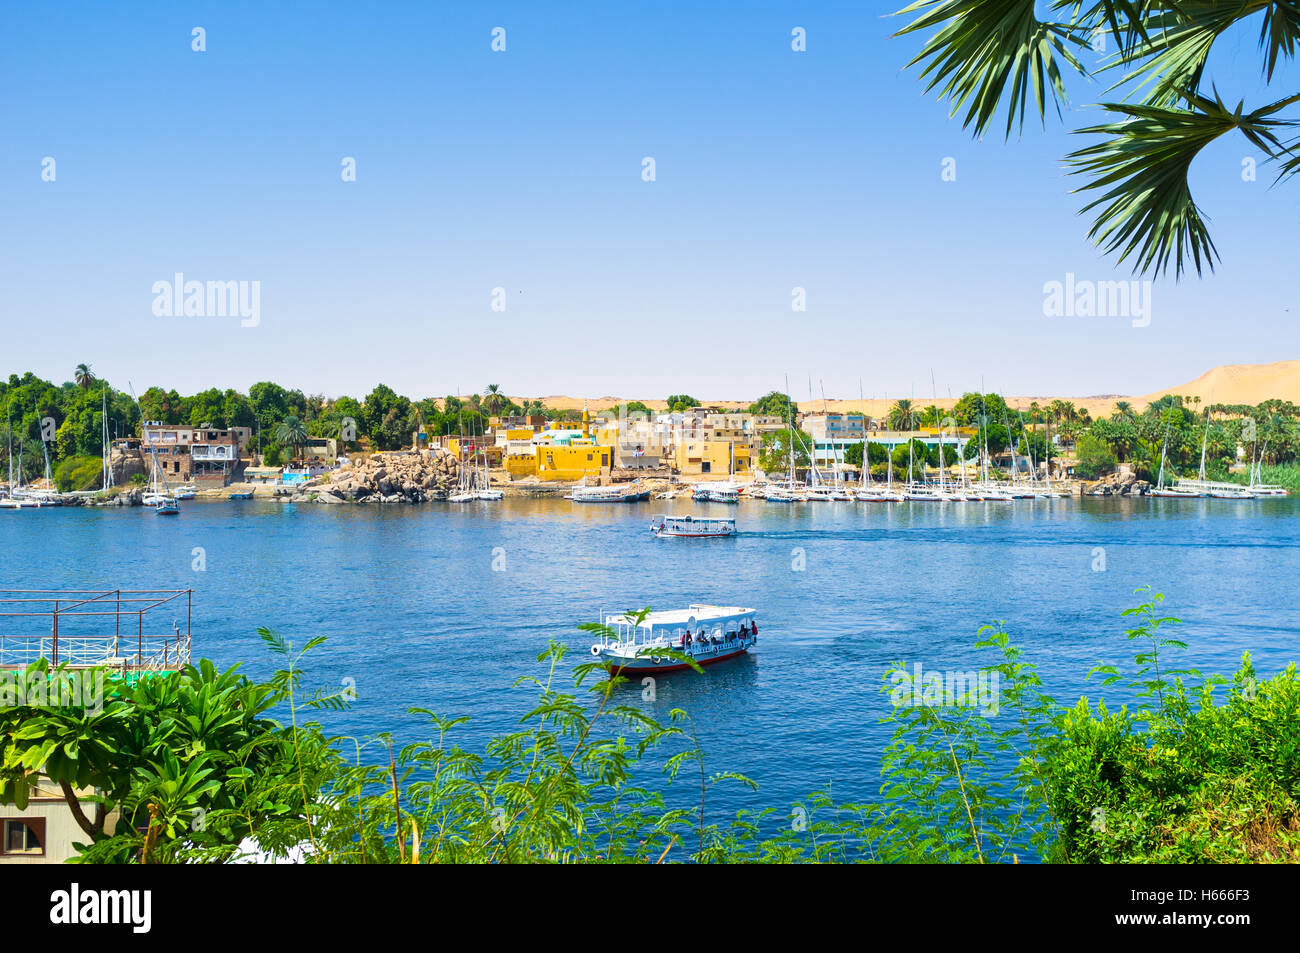 The view on the Nubian village, located on the Kitchener's island from the Kornish al Nile, Aswan, Egypt. Stock Photo